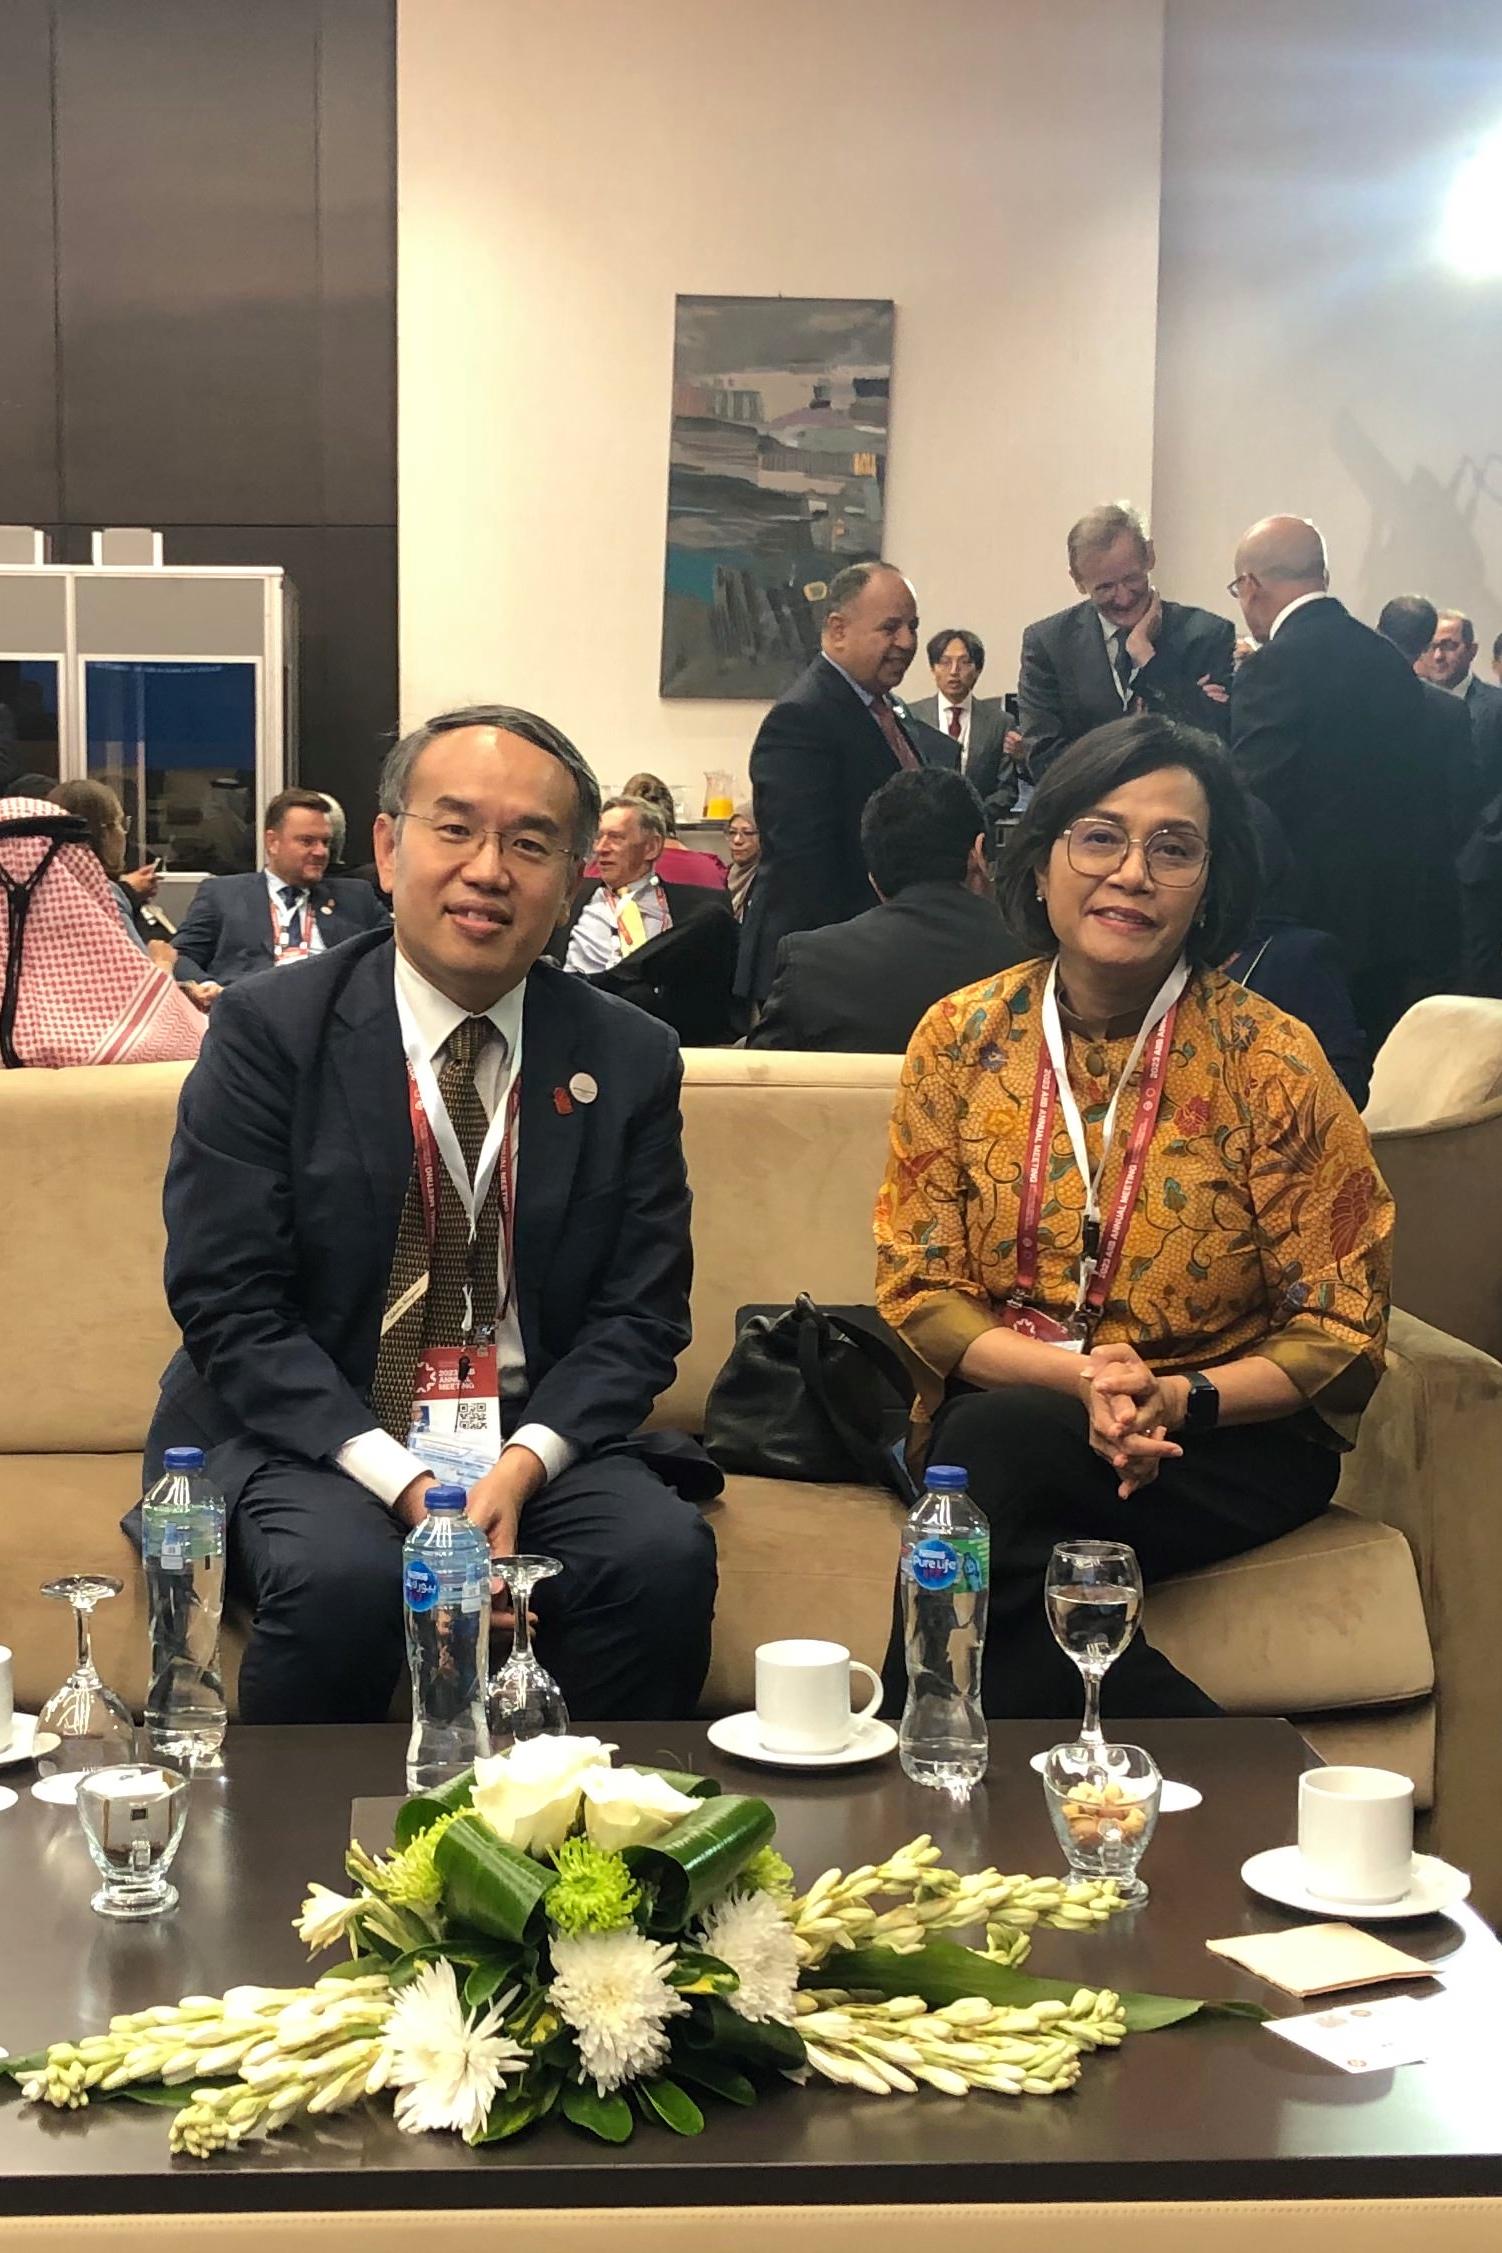 The Secretary for Financial Services and the Treasury, Mr Christopher Hui, continues his visit in Egypt. Photos shows Mr Hui (left) meeting with the Minister of Finance of Indonesia, Dr Sri Mulyani Indrawati (right), on the sidelines of the Eighth Annual Meeting of the Board of Governors of the Asian Infrastructure Investment Bank in Sharm El Sheikh on September 25 (Sharm El Sheikh time).